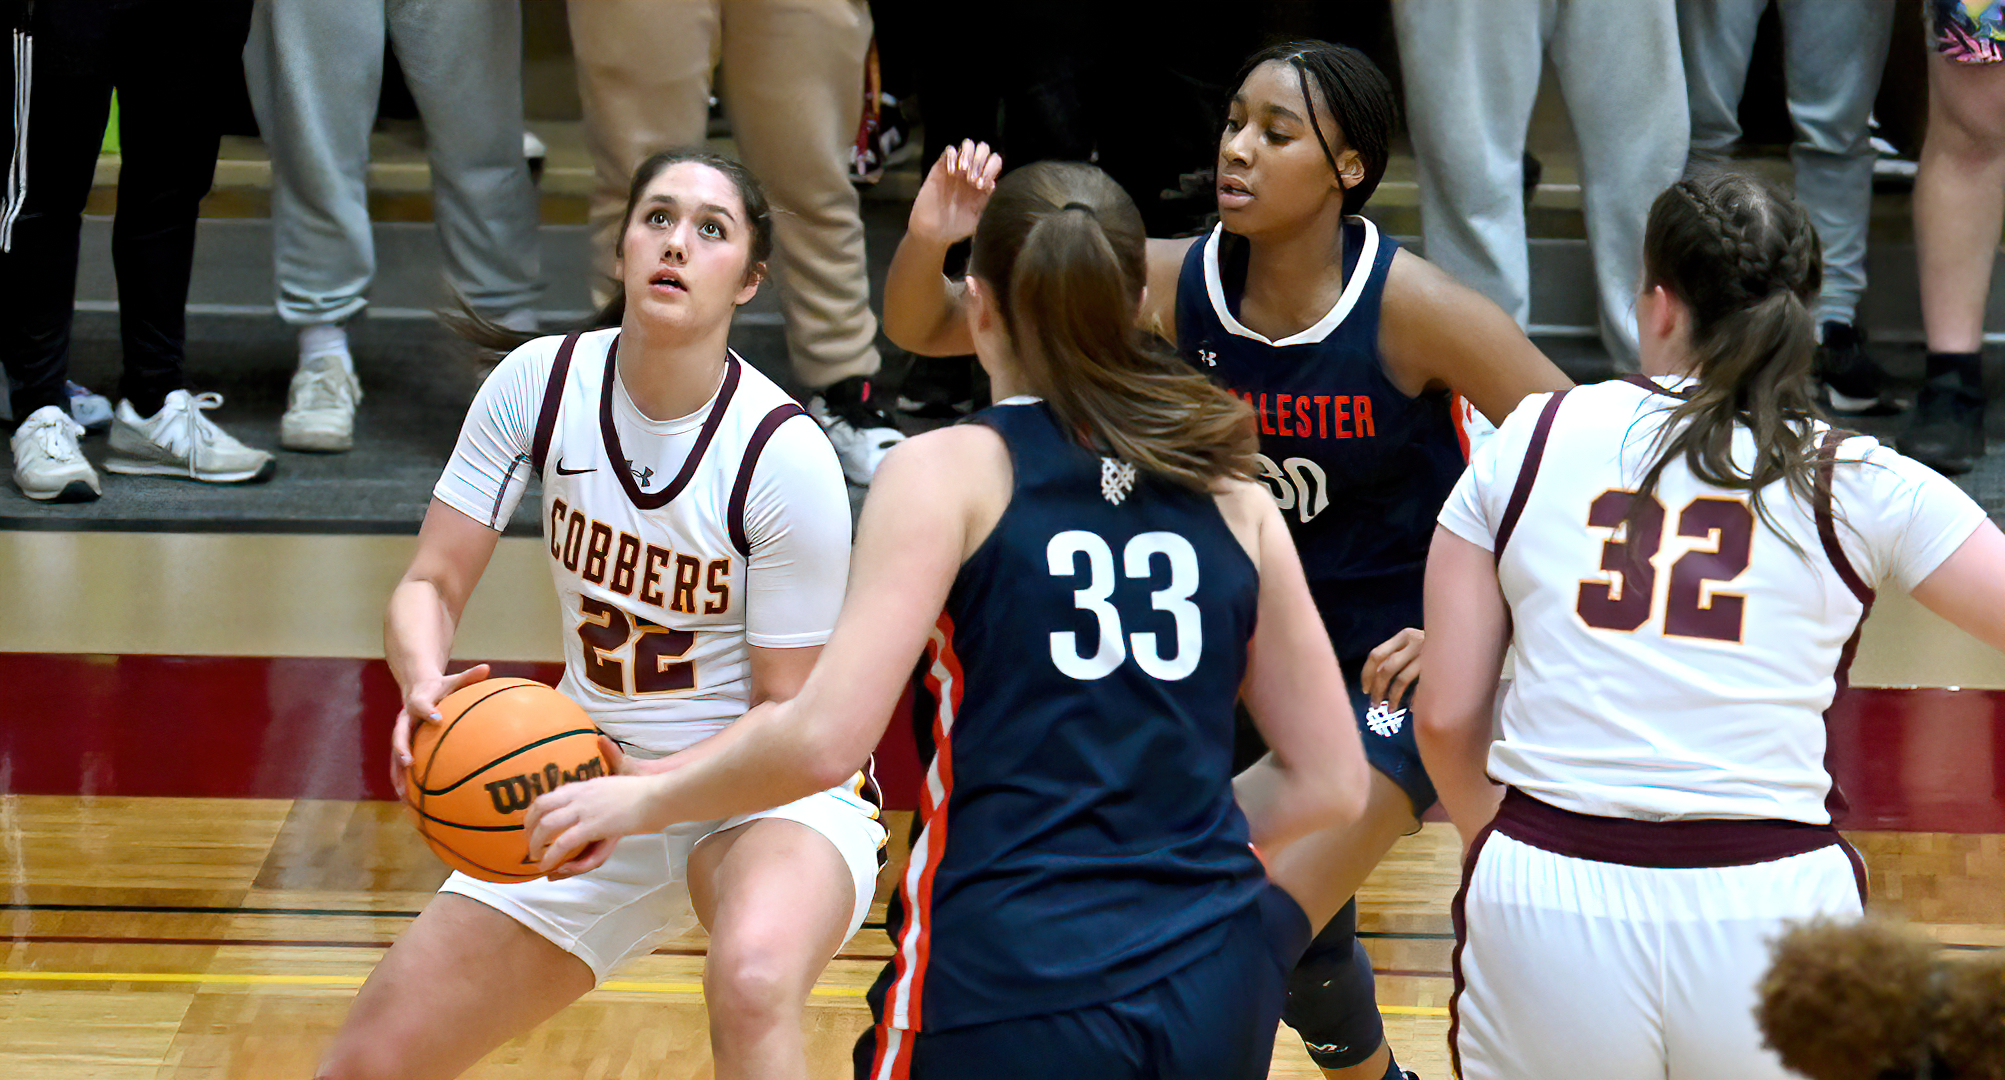 Makayla Anderson prepares to go up for two of her game-high 18 points in the Cobbers' win over Macalester.